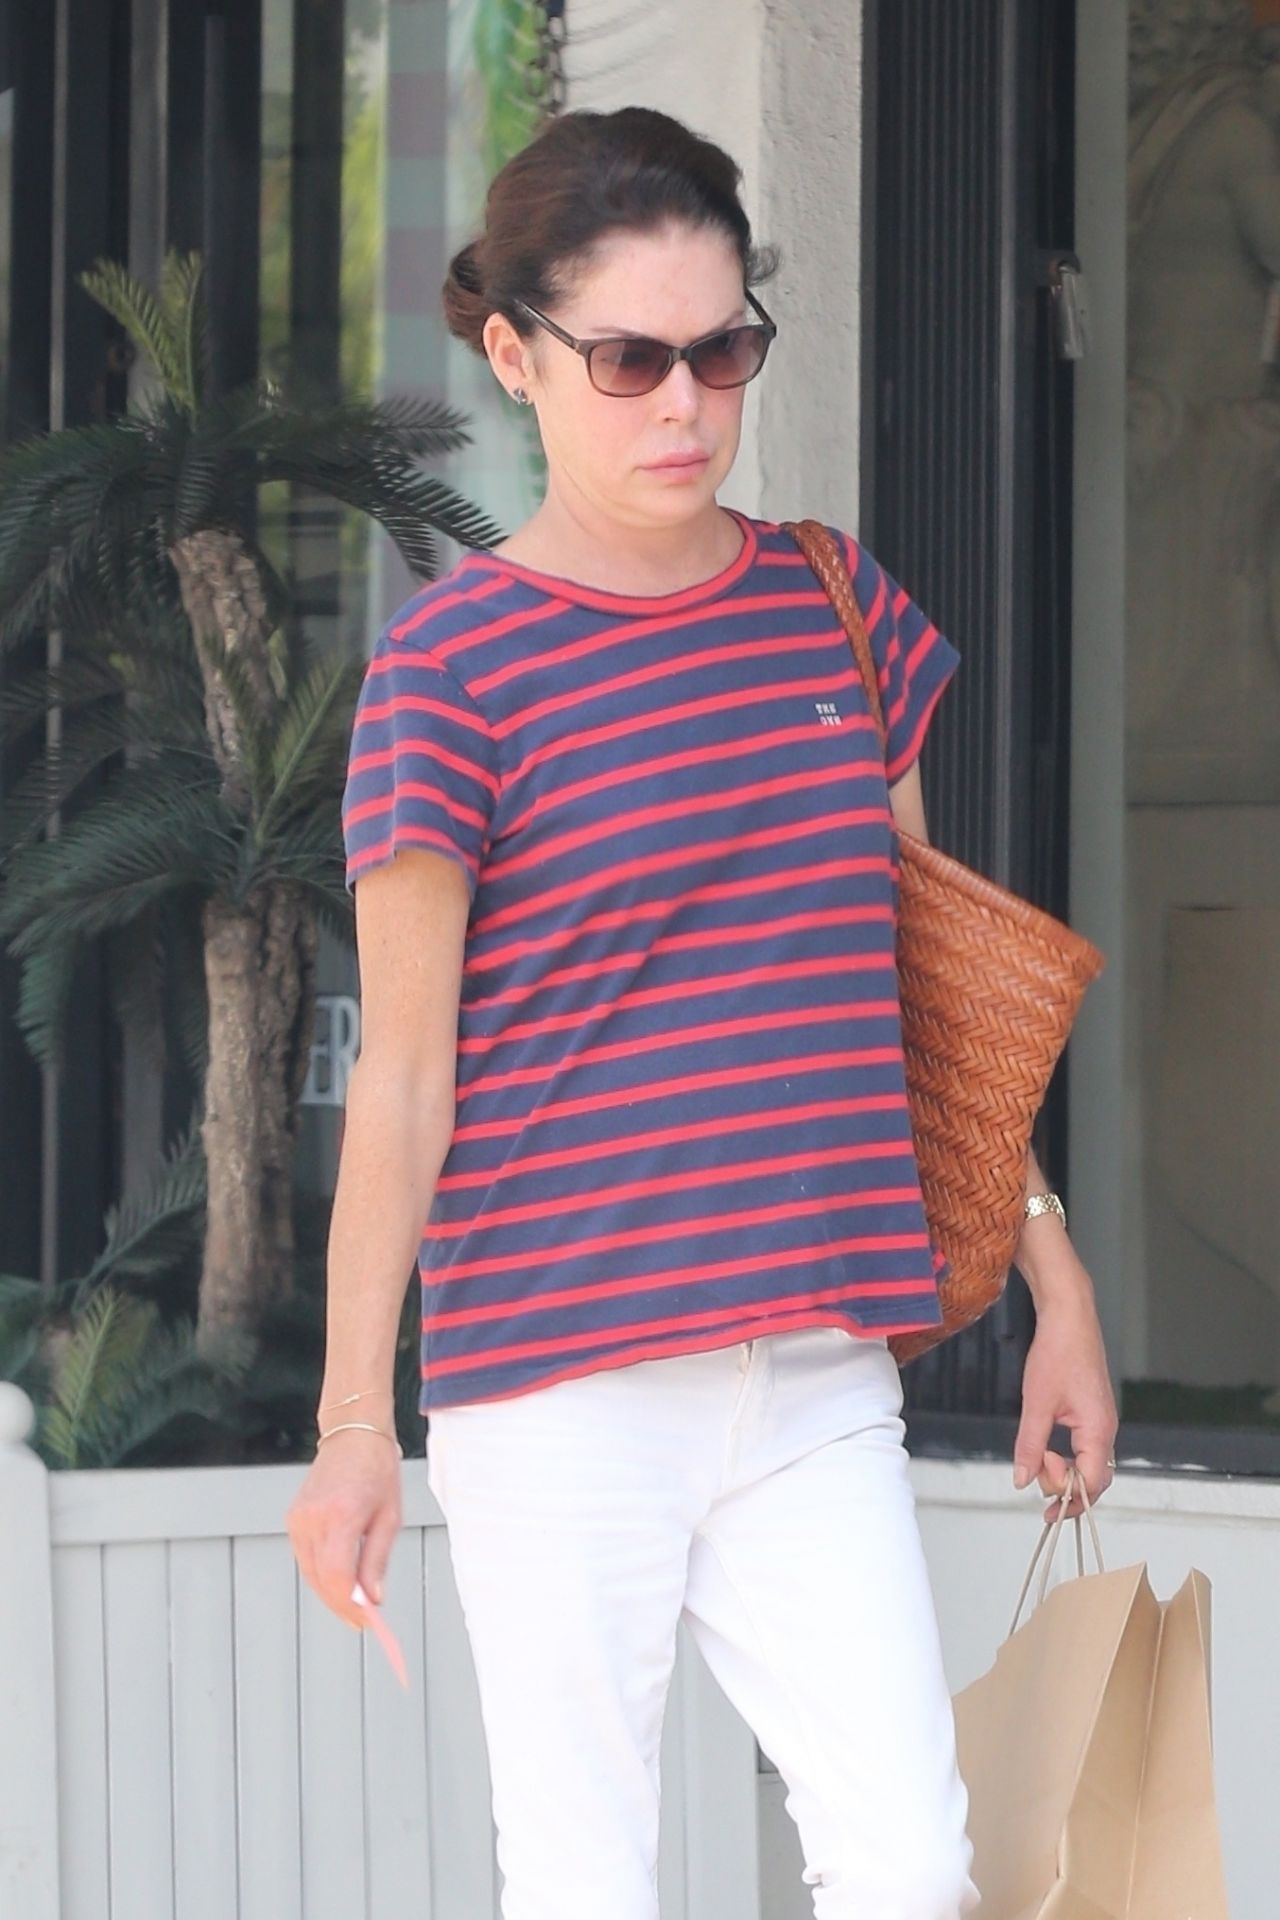 Lara Flynn Boyle in Casual Outfit - Los Angeles 08/26/2018.